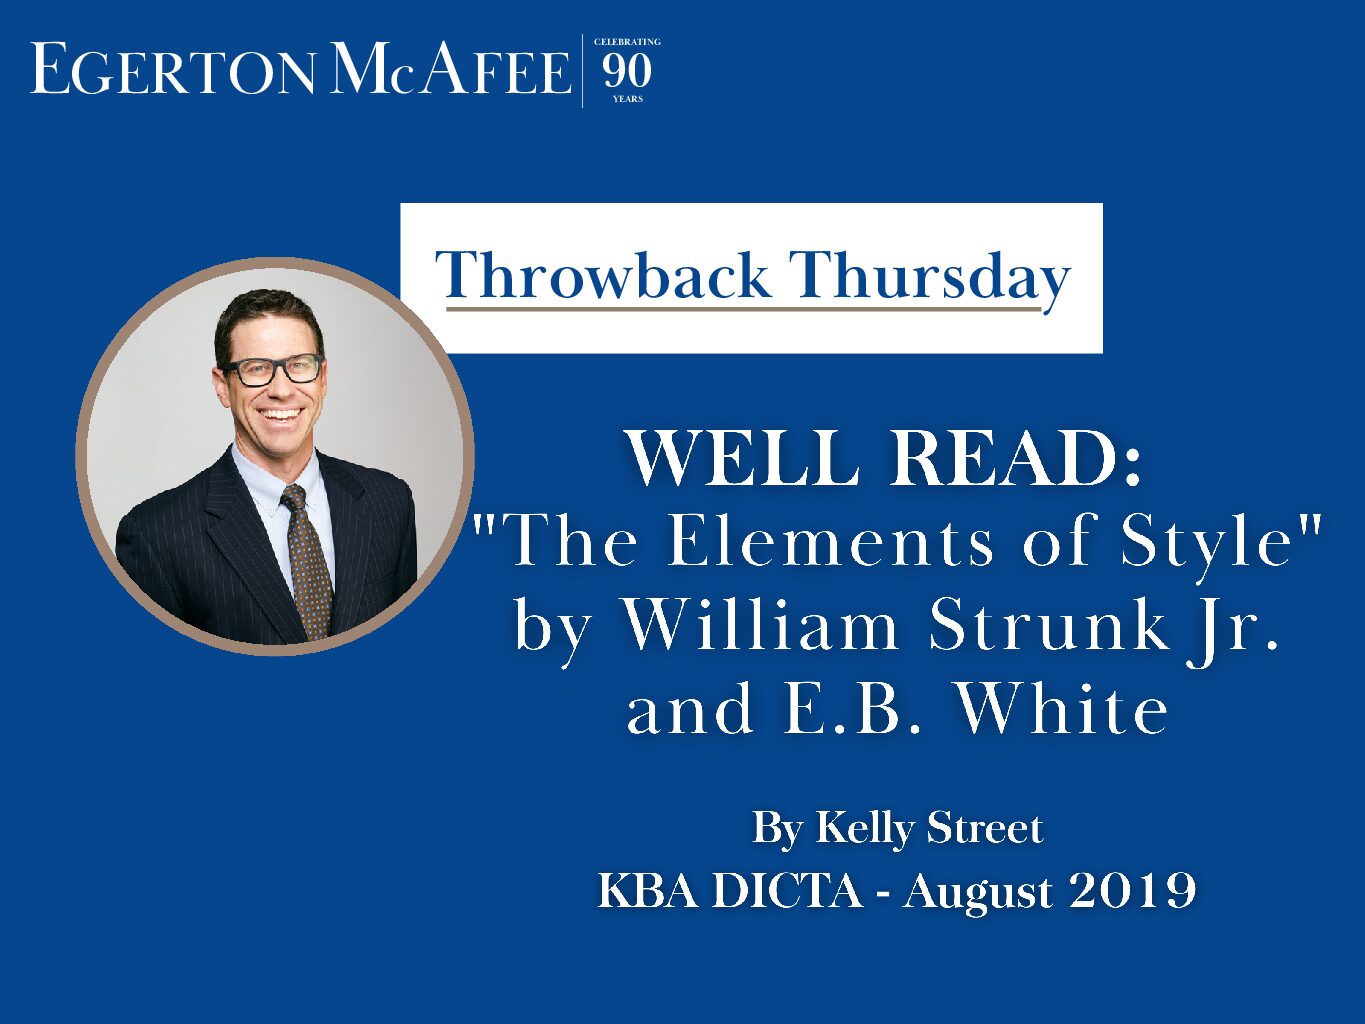 Throwback Thursday – WELL READ by Kelly Street: “The Elements of Style”